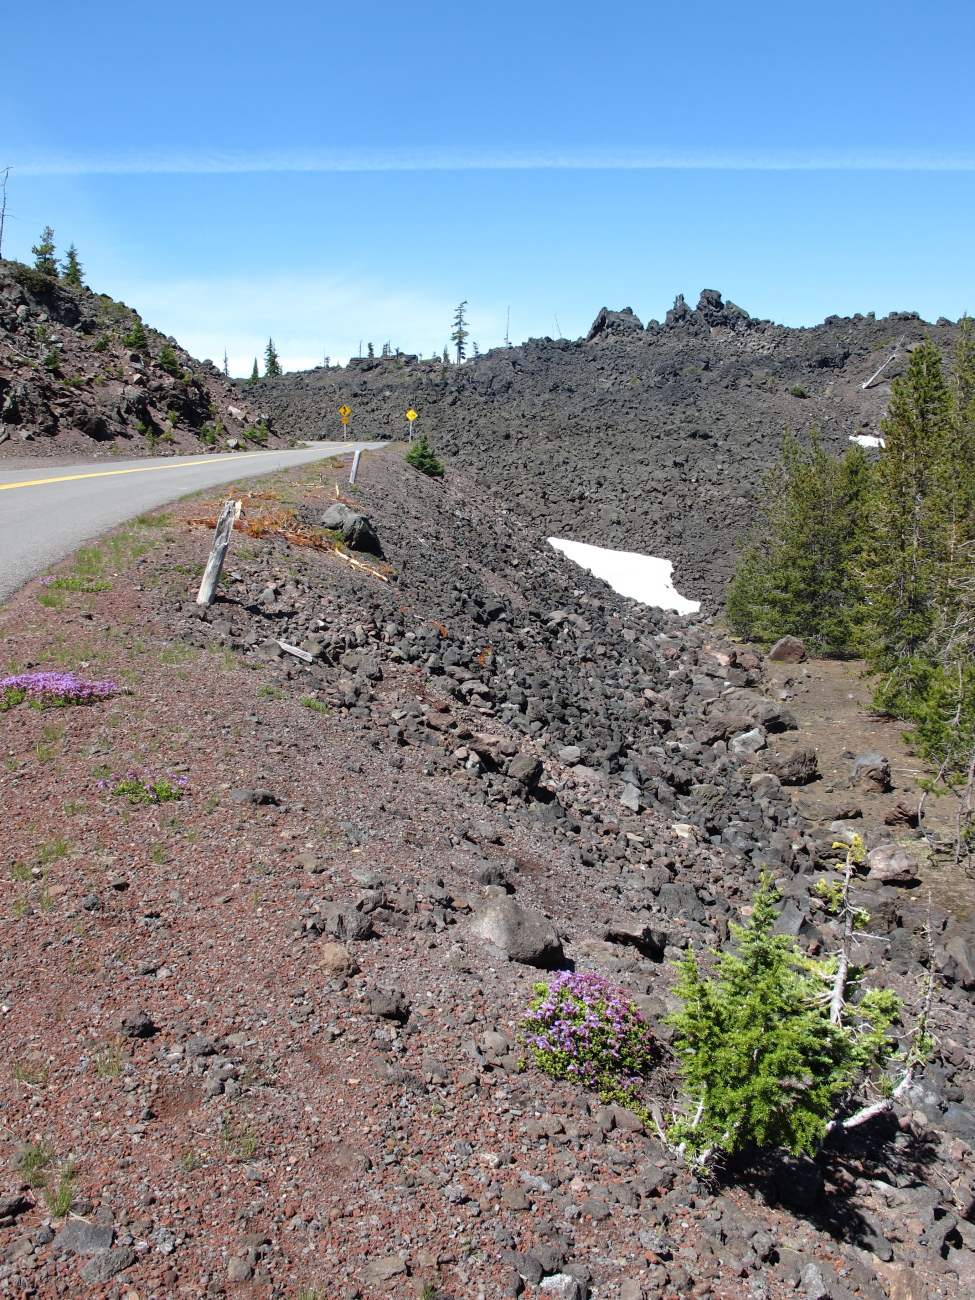 Volcanic terrain on the road up McKenzie Pass passing over the Cascades